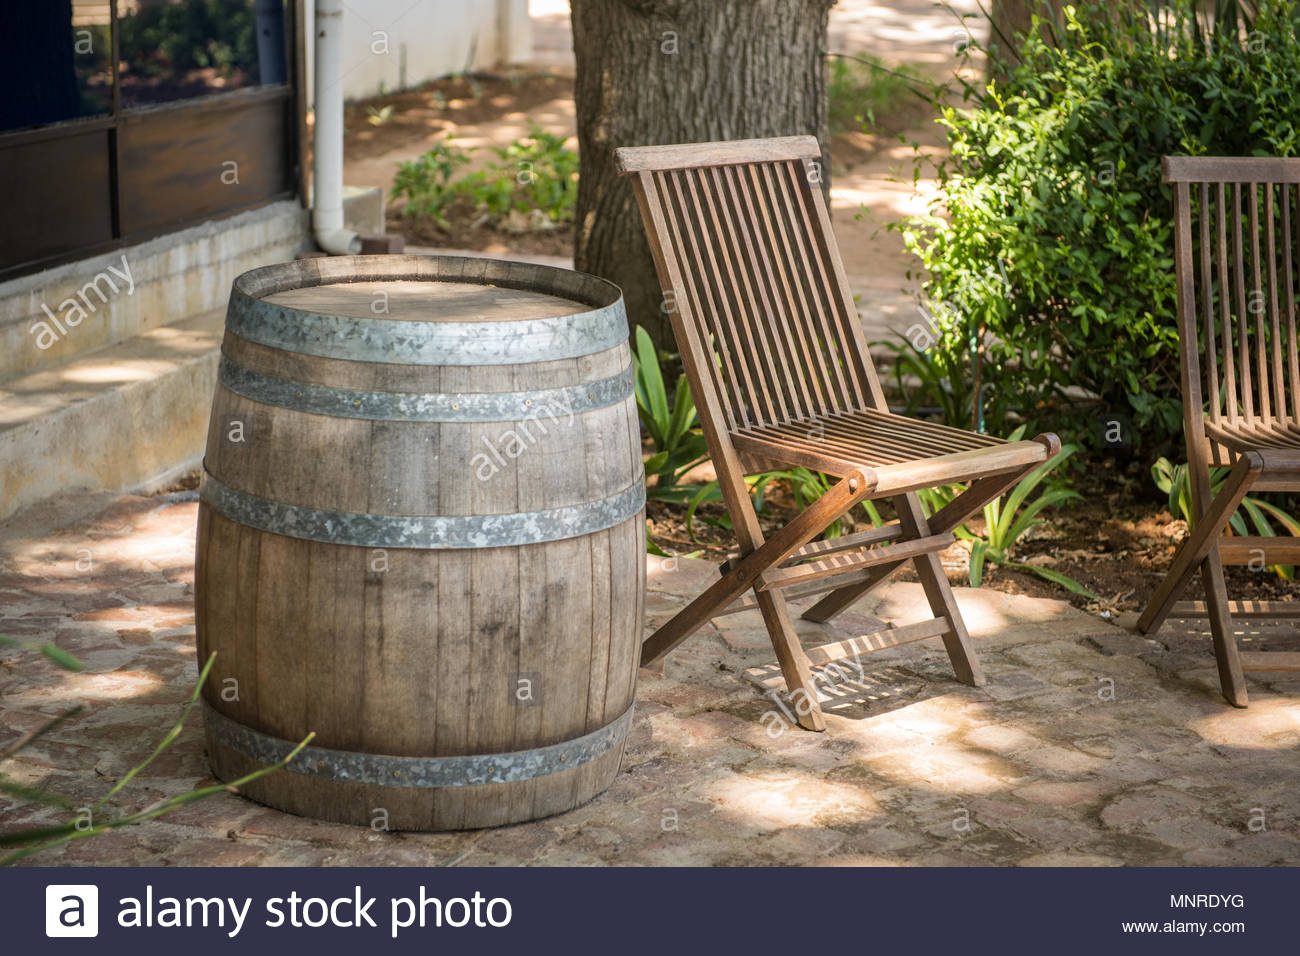 An Empty Wooden Patio Chair Positioned Next To Barrel On throughout size 1300 X 956